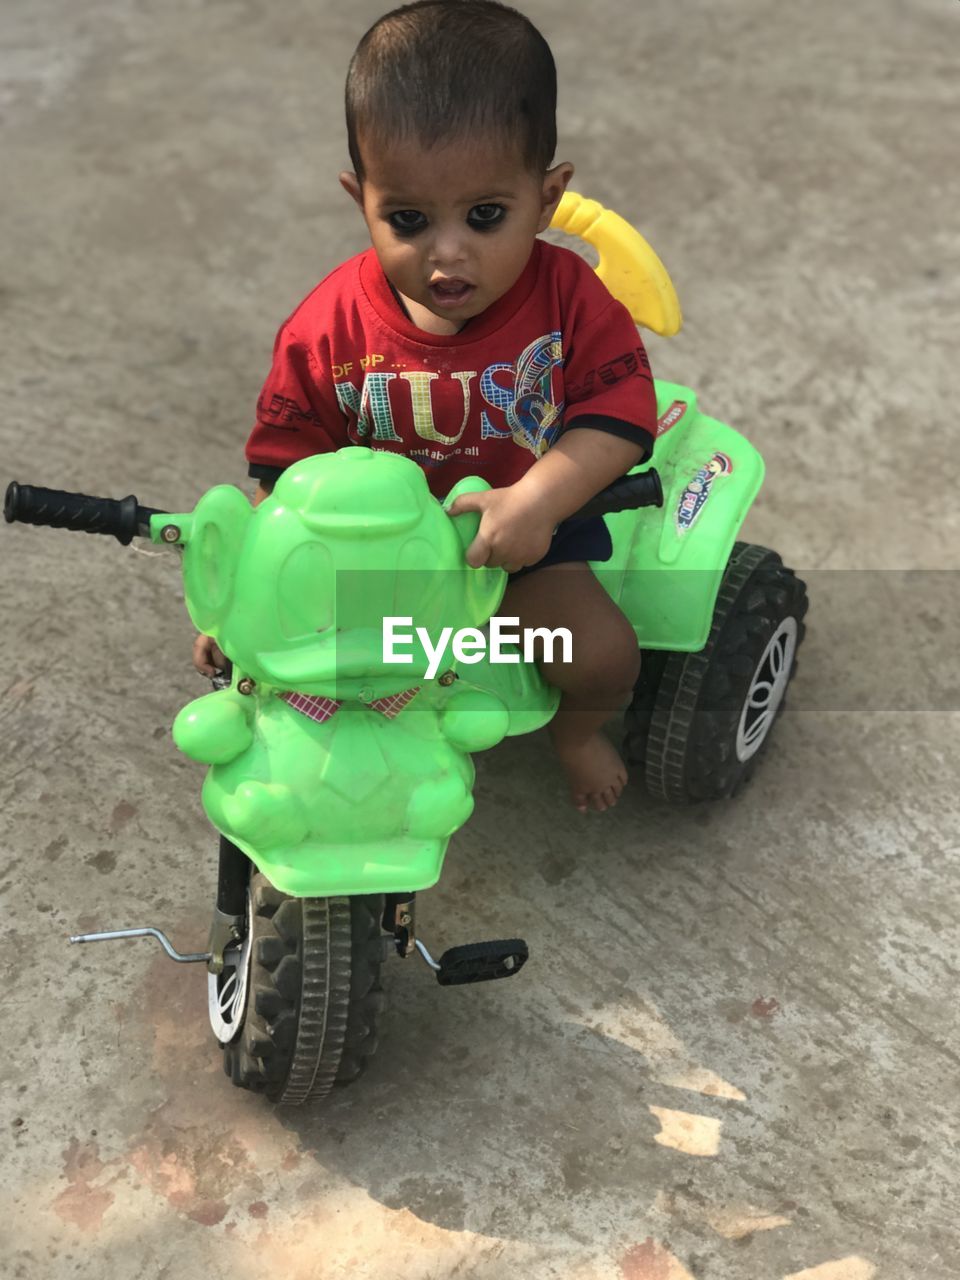 childhood, child, toddler, men, one person, baby, full length, vehicle, transportation, toy, cute, person, portrait, tricycle, emotion, happiness, toy car, land vehicle, mode of transportation, looking at camera, wheel, lifestyles, high angle view, bicycle, smiling, innocence, outdoors, fun, tire, casual clothing